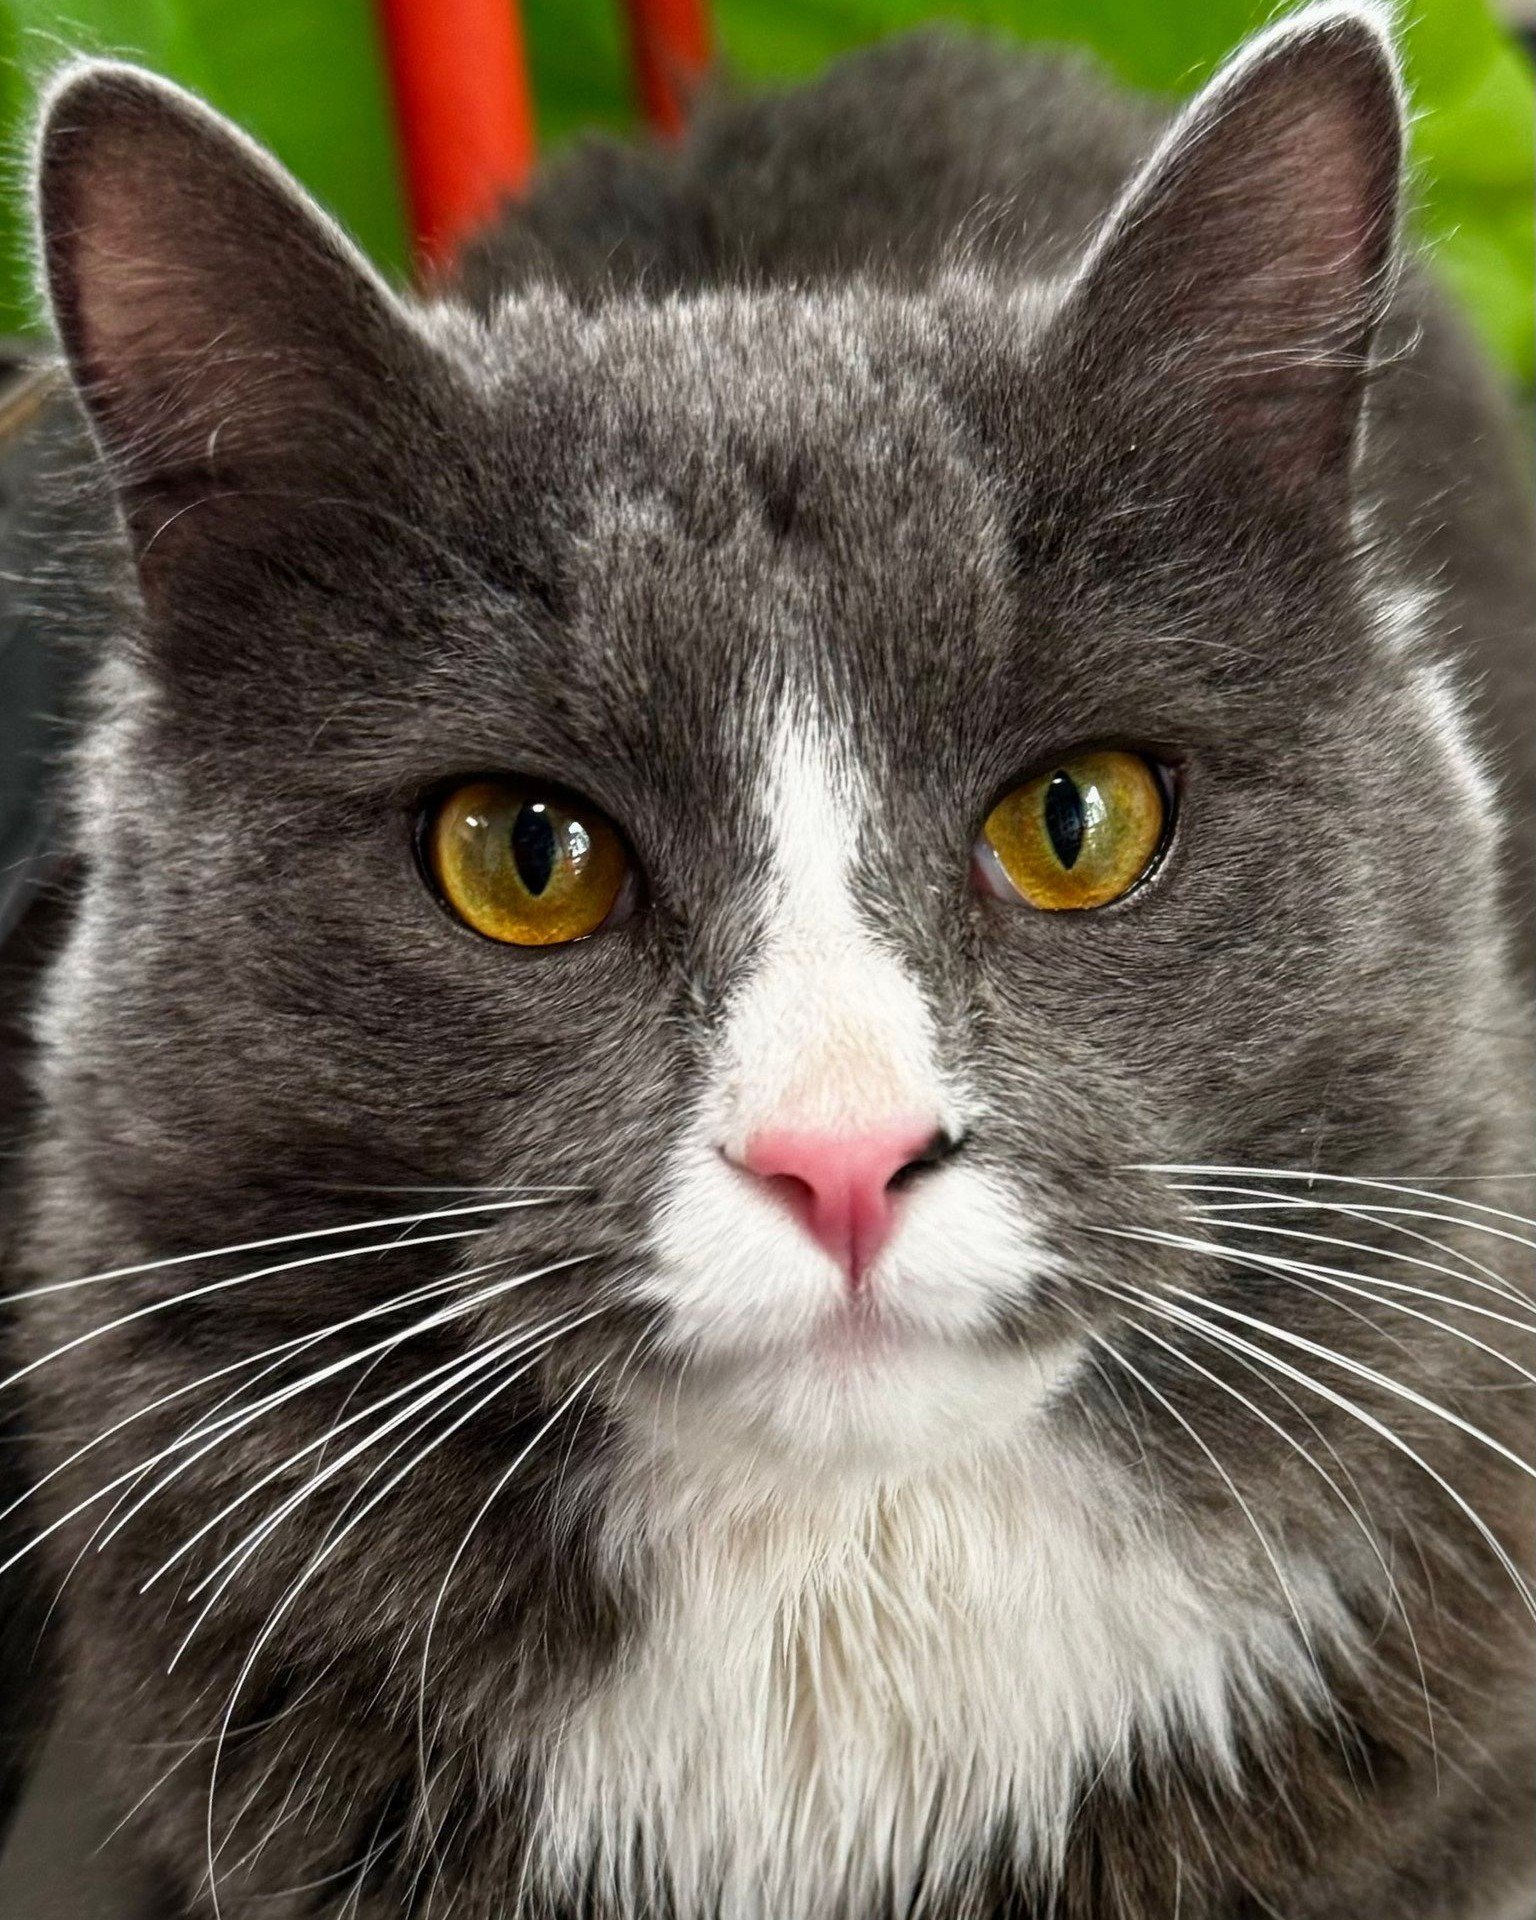 We have a lot of beautiful cats right now! Visit our cat page to learn more.

https://bluemountainhumane.org/cats

Thank you to our volunteer Machelle Colligan for these great photos!